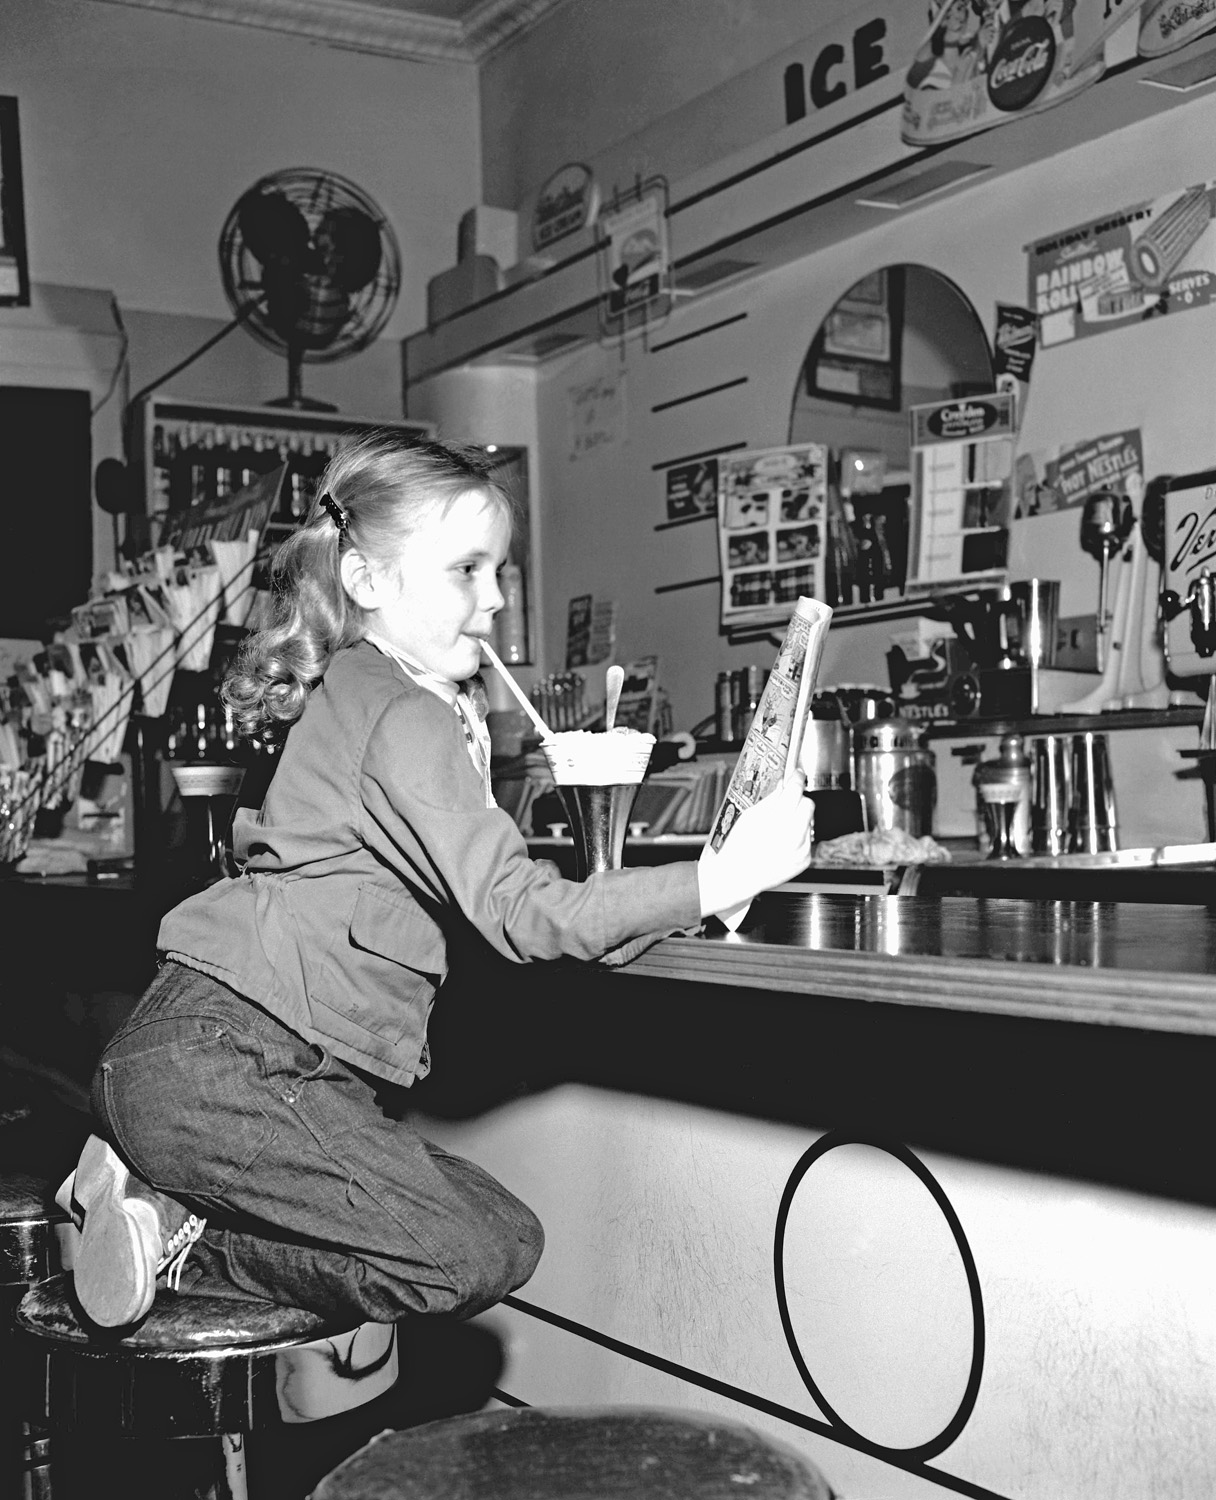 1950's Detroit neighborhood soda shop.  Unknown young lady enjoying an ice cream soda while reading the comics. (Maybe an old newspaper comic fan can name them) Notice the classic Detroit Verniors ginger ale tap among other classic 1950's soda shop items.  Photo taken by my grandfather, Howard Mcgraw of the Detroit News. Scanned from a 4 by 5 negative. View full size.